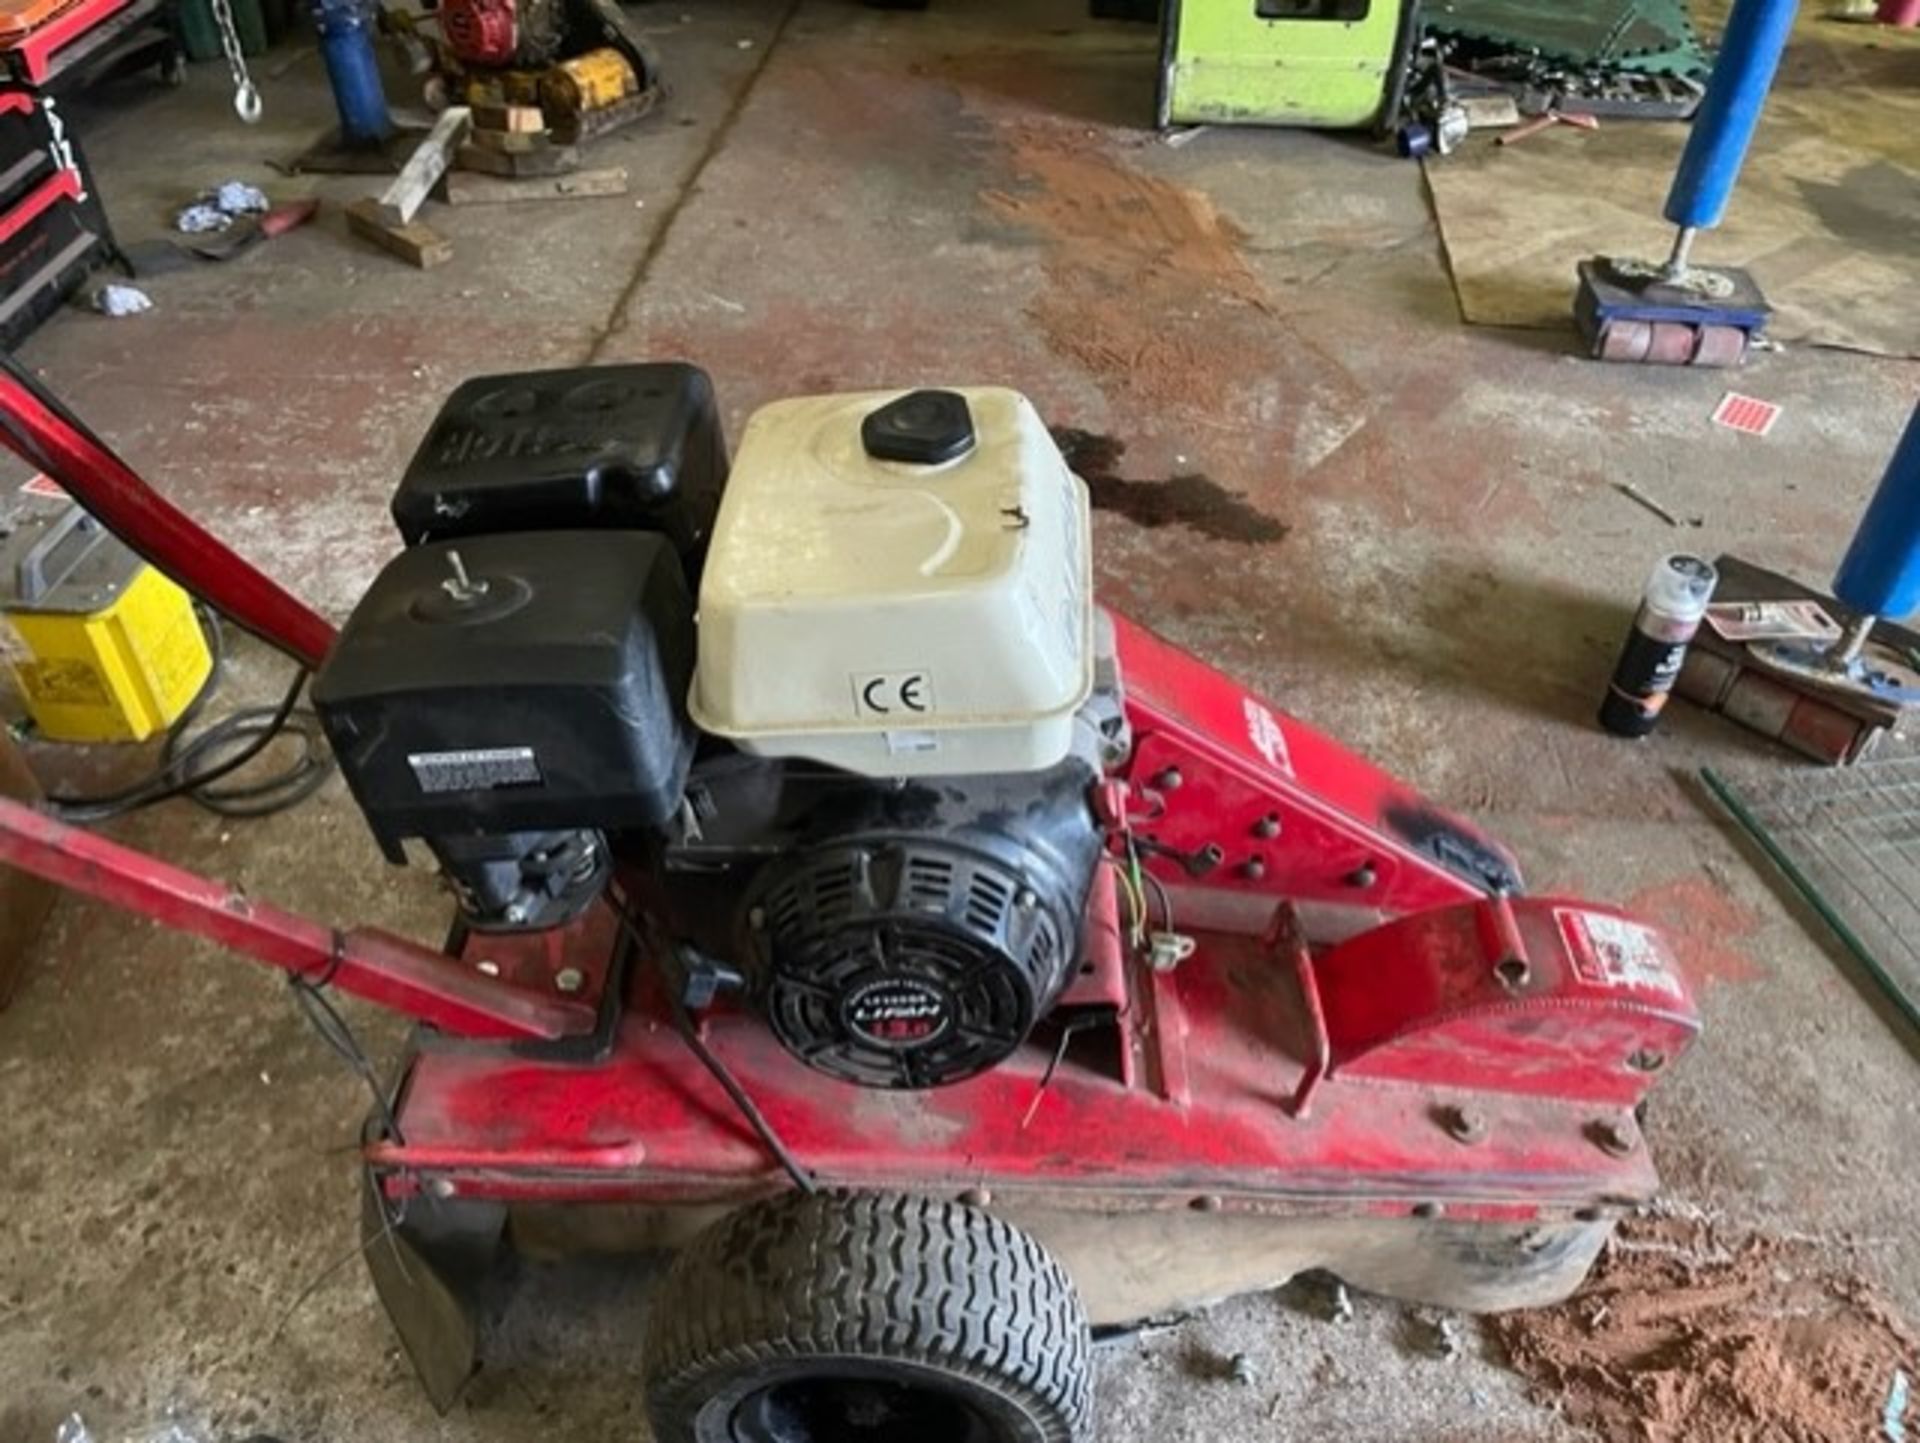 Carlton stump grinder that has an electric start lifan 390 engine in it the engine fires up and only - Image 5 of 7